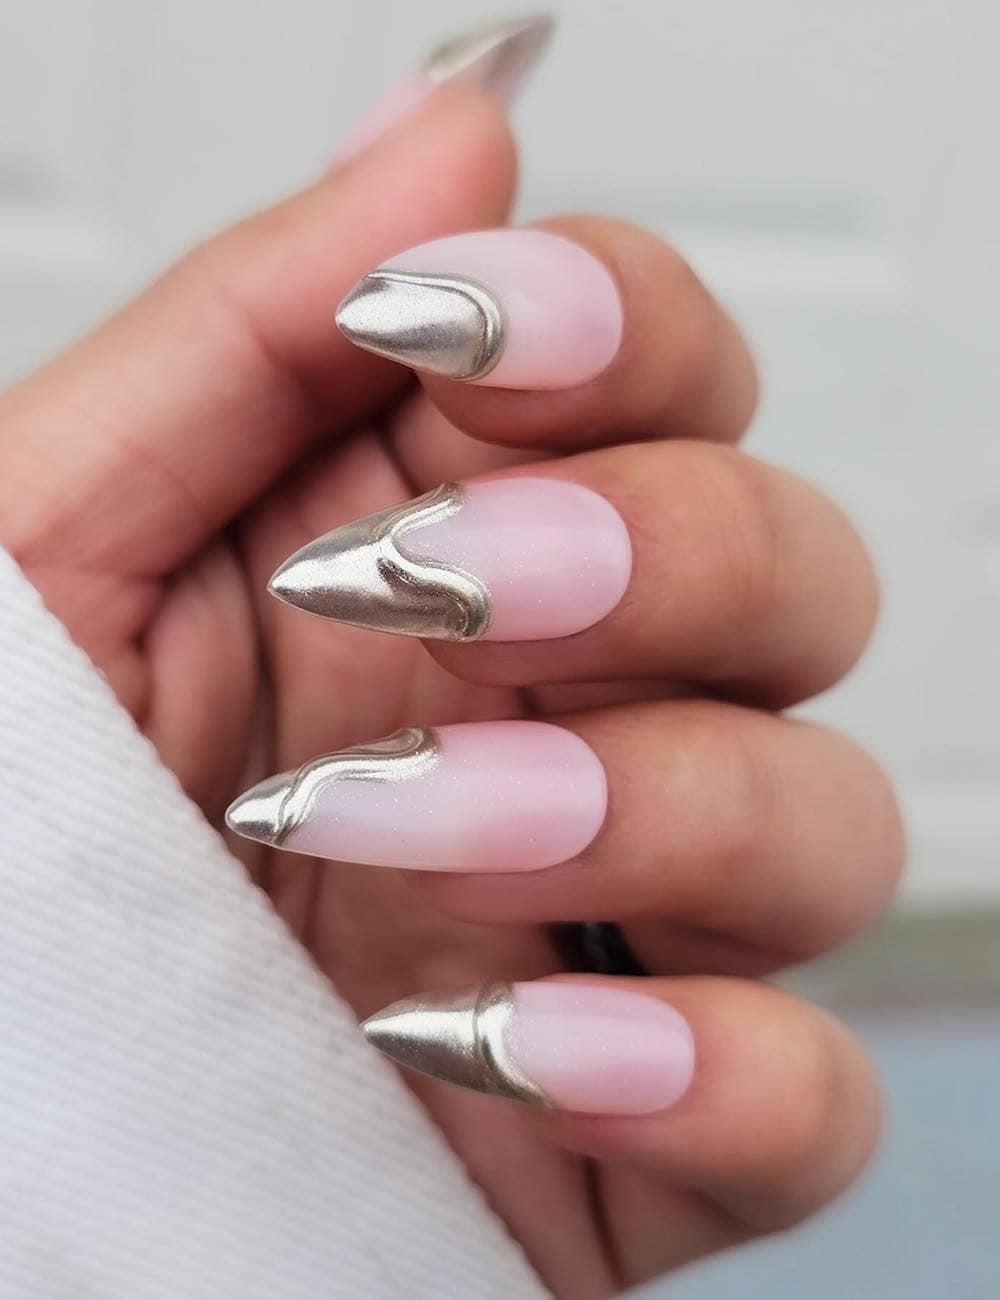 long nude pink stiletto nails with metallic silver dripping tips